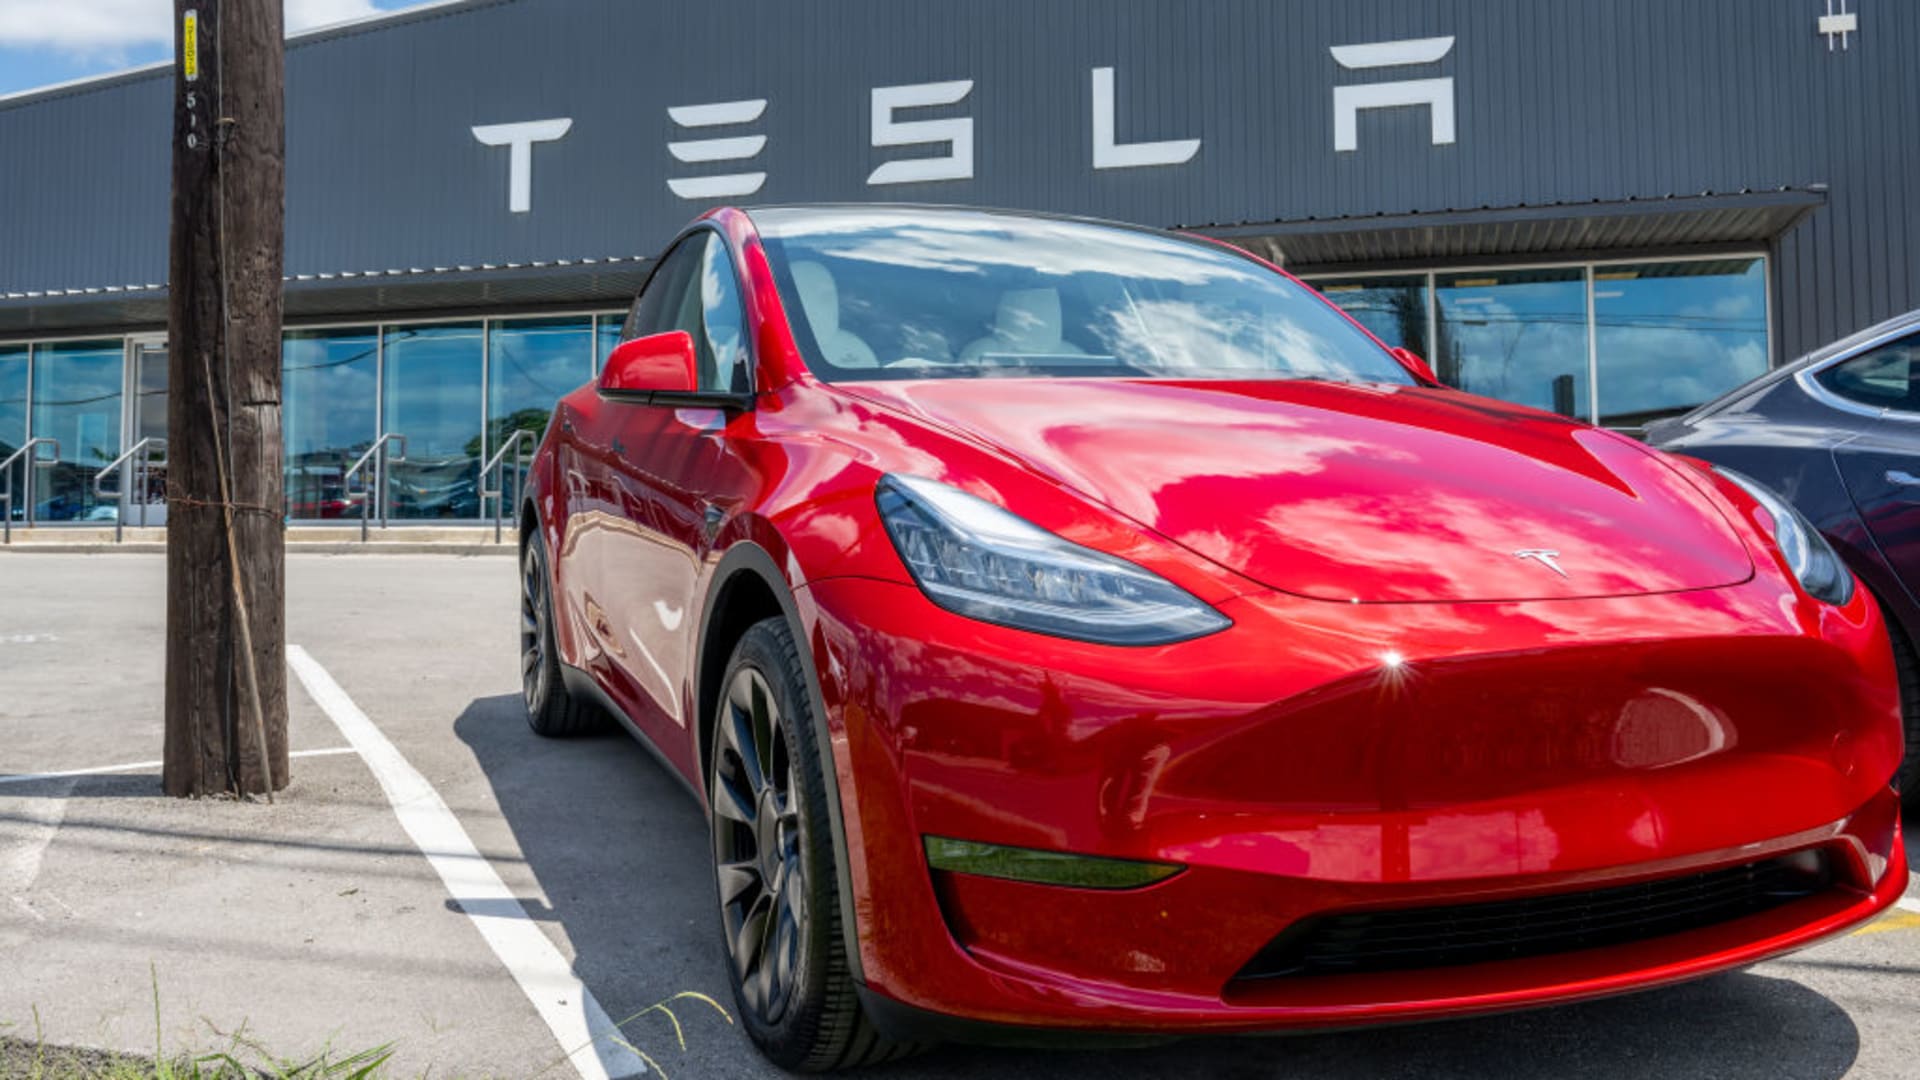 Tesla whistleblowers filed a complaint to the SEC in 2021, but the agency never interviewed them. Here's what the complaint said